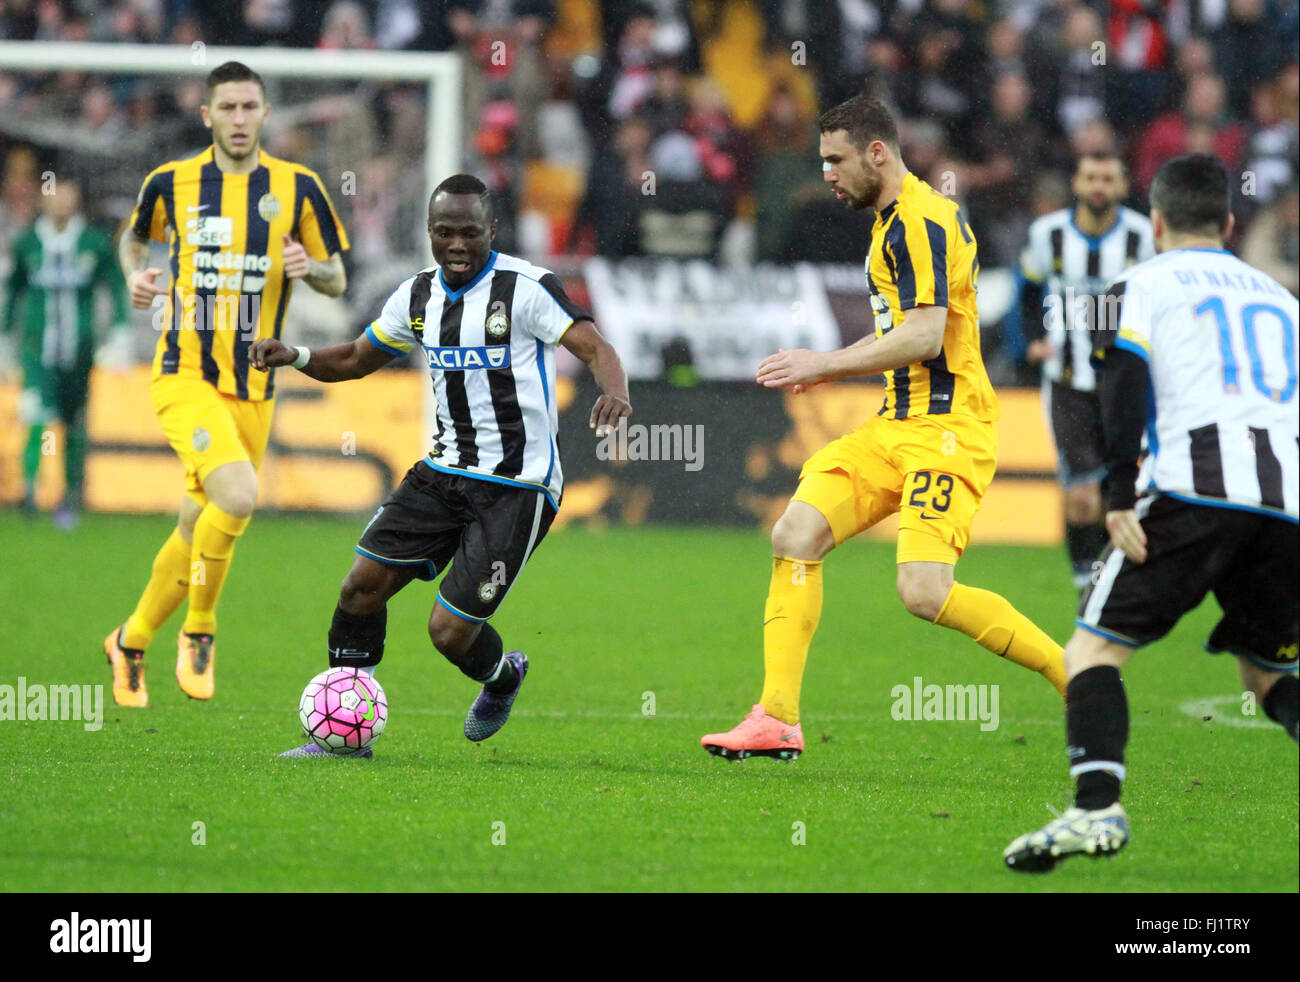 Udine, Italy. 28th Feb, 2016. Udinese's midfielder Emmanuel Agyemang Badu controls the ball during the Italian Serie A football match between Udinese Calcio v Hellas Verona FC. Udinese beats 2-0 Hellas Verona in Italian Serie A football match, goals by Badu and Thereau at Dacia Arena in Udine. Credit:  PACIFIC PRESS/Alamy Live News Stock Photo